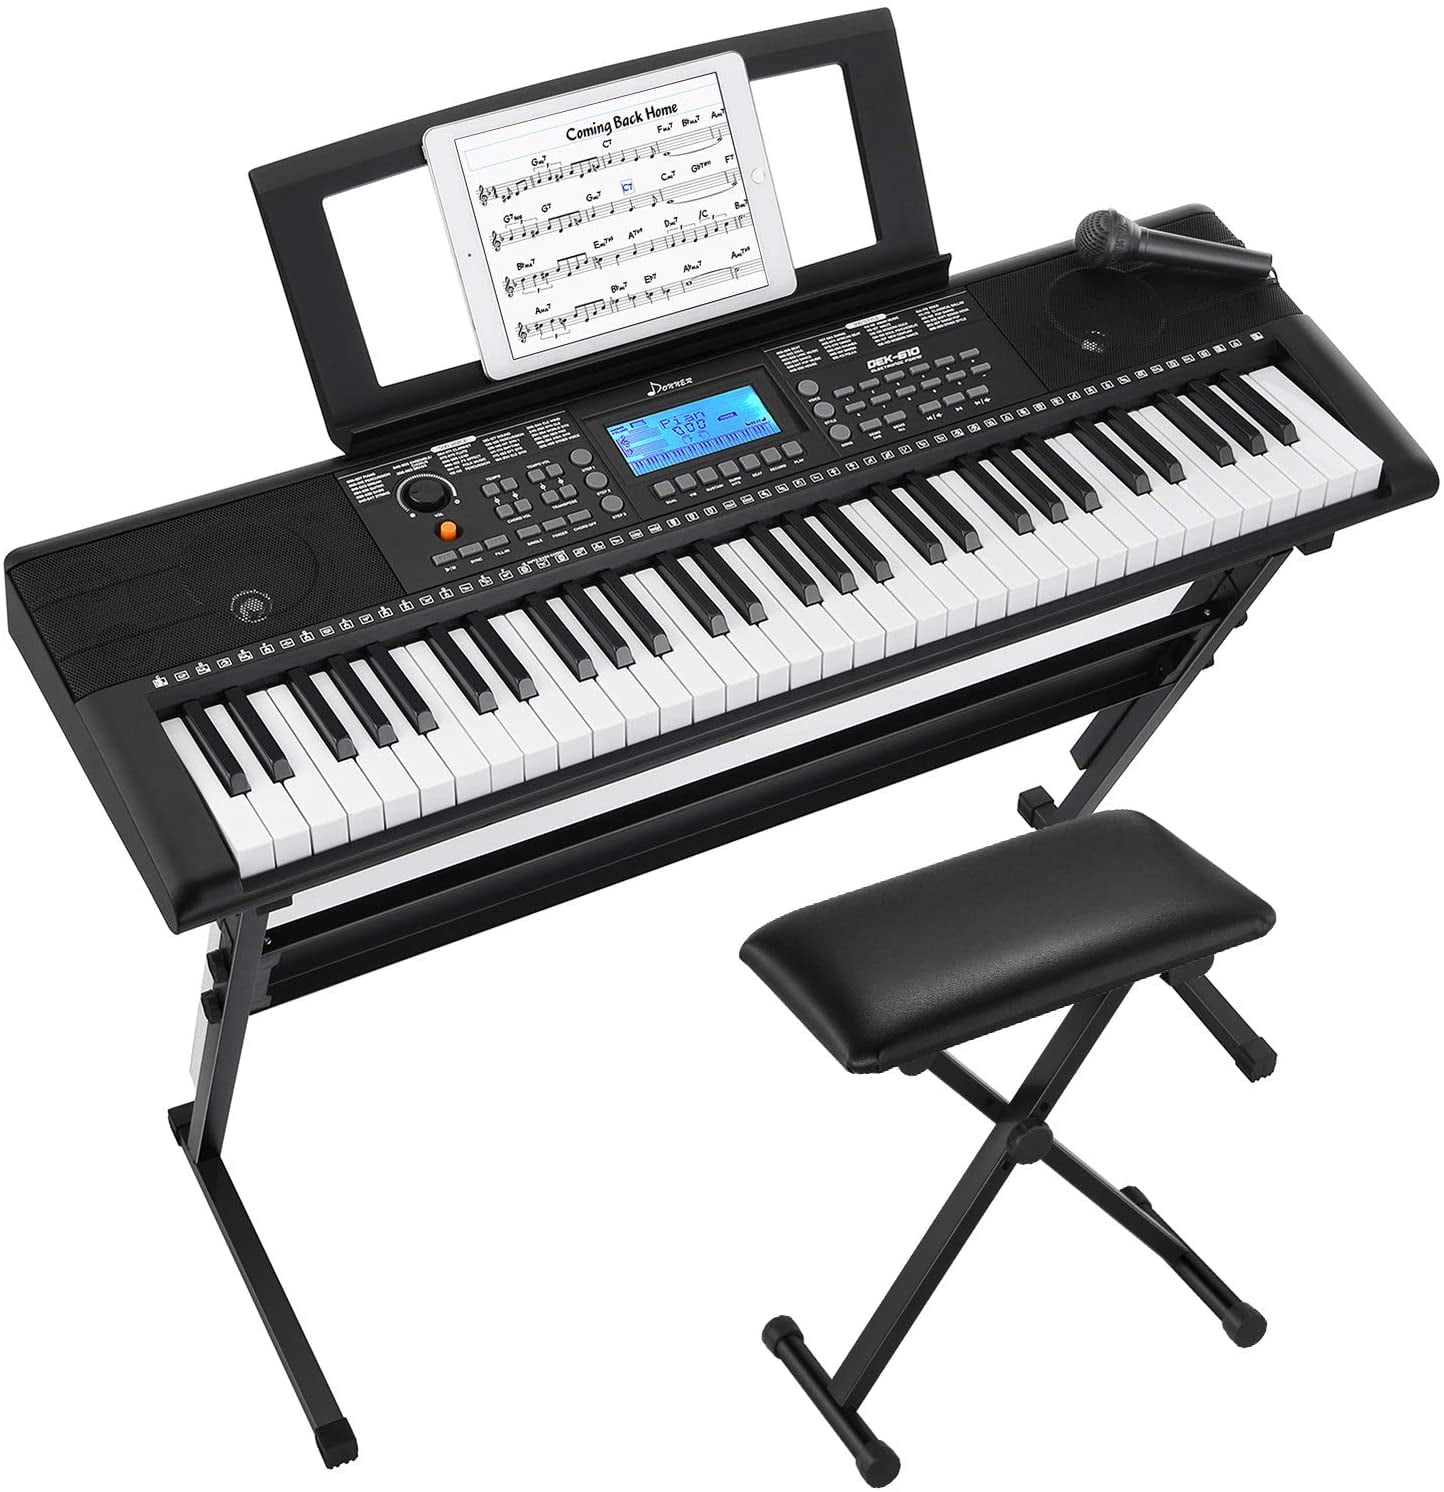 Include a Music Stand and Microphone Donner DEK-510 54 Keys Electronic Keyboard Portable Electric Music Piano with Full-Size Keys for Beginners